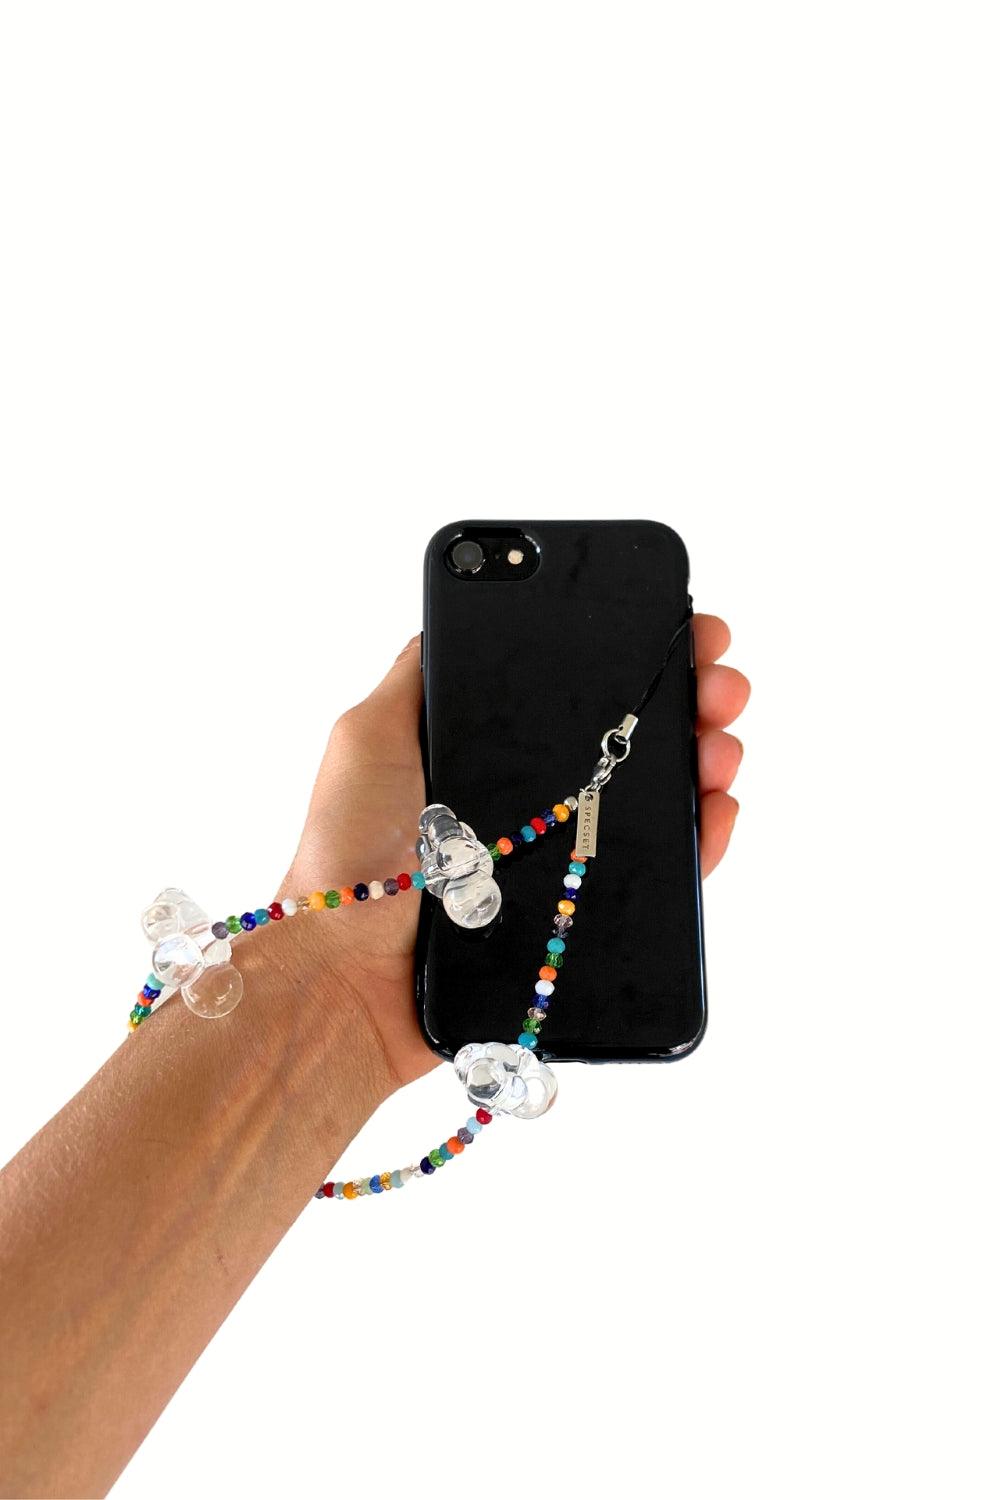 BRIGHT SKY - COLORFUL Wrist Phone Chain - SPECSET